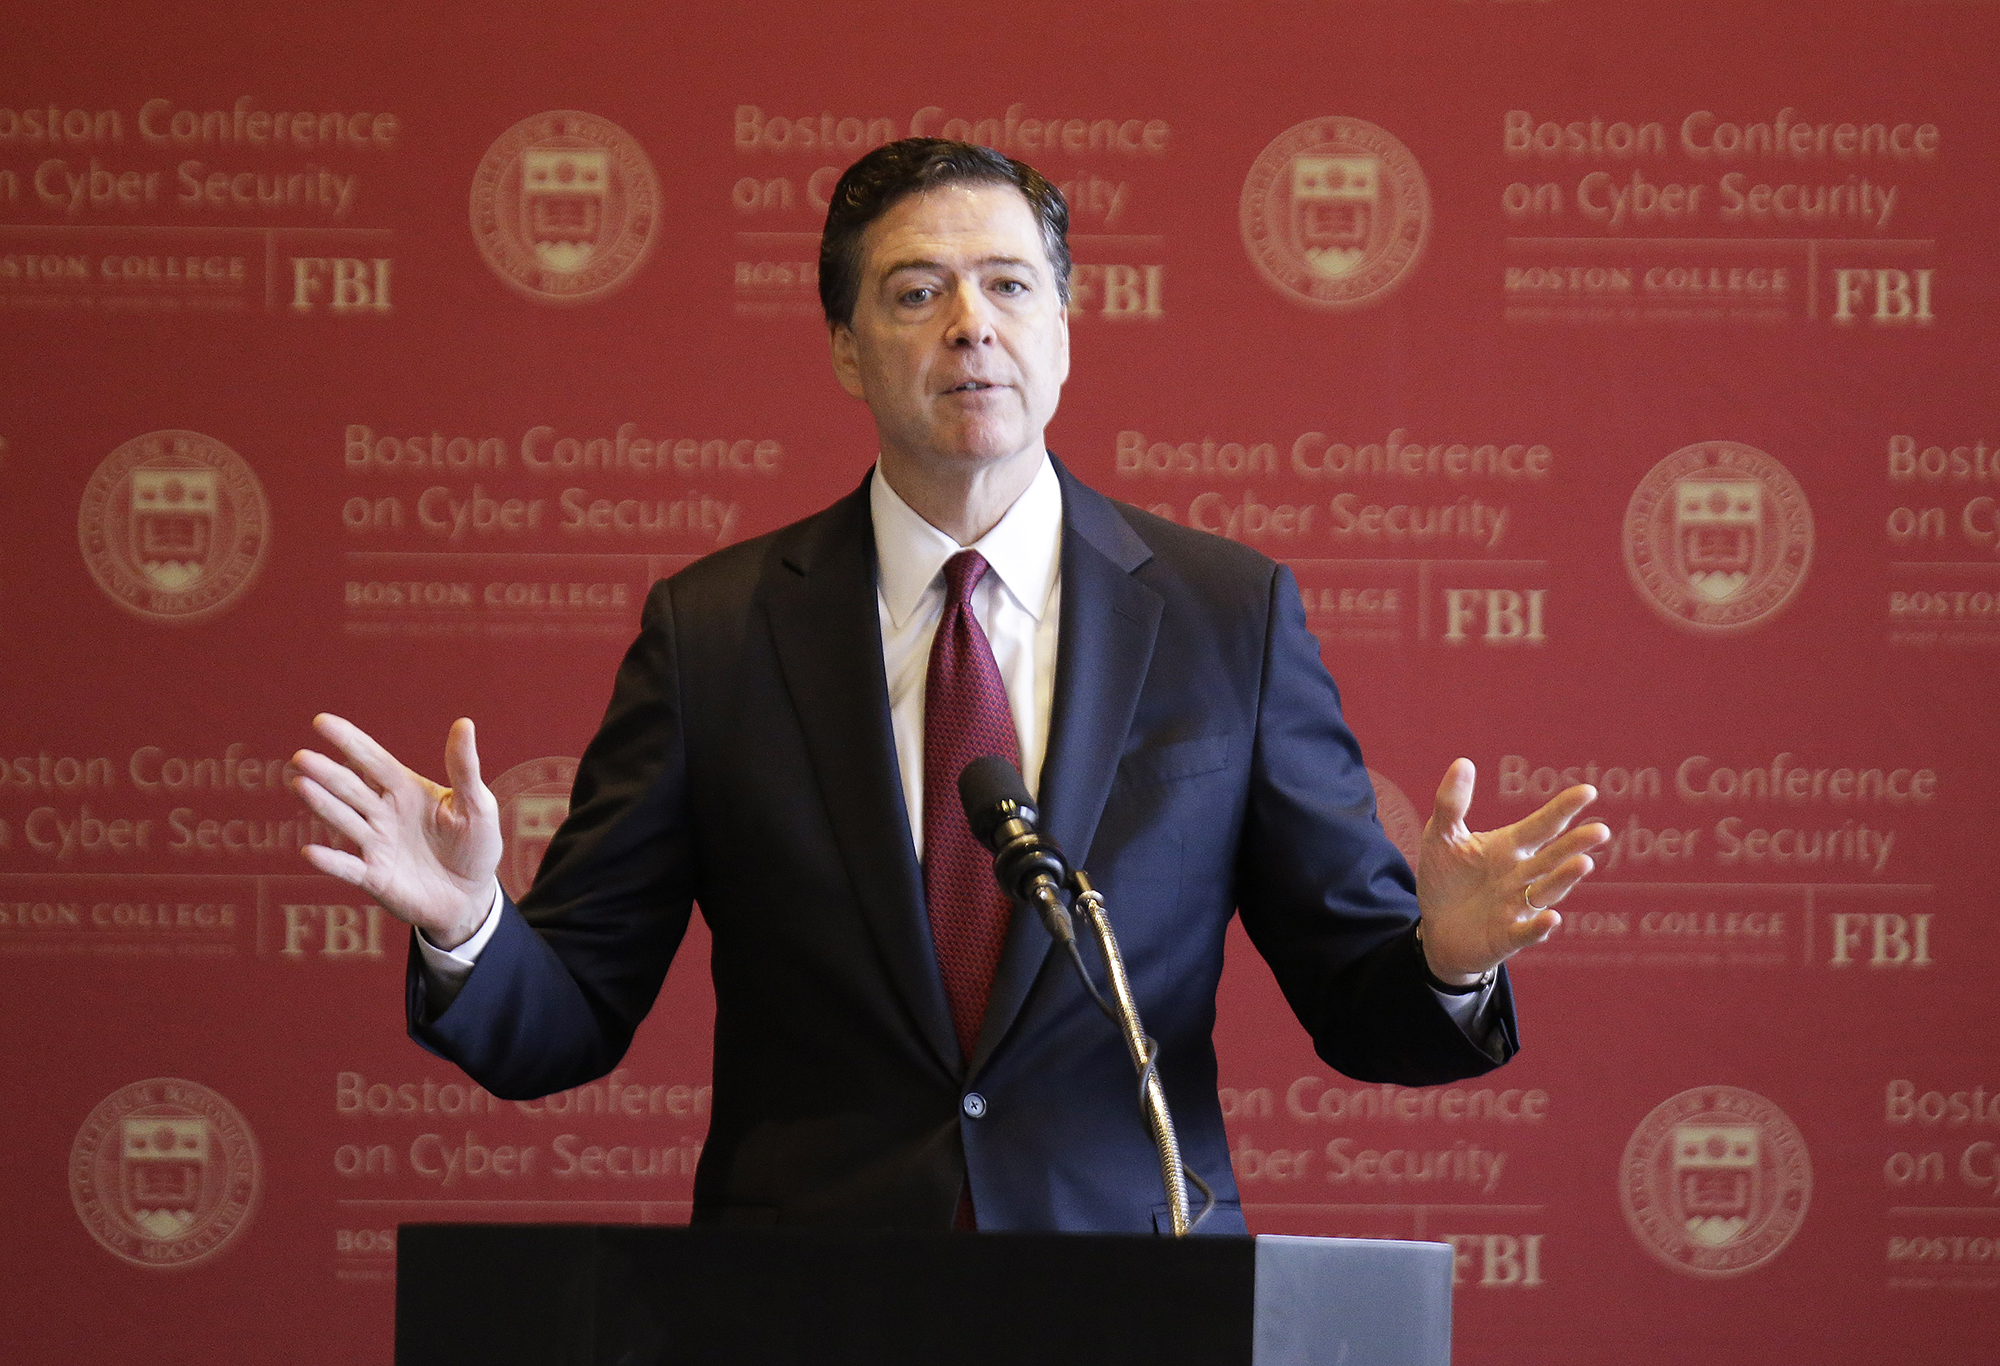 FBI Director James B. Comey gestures as he delivers an address on cyber security at the first Boston Conference of Cyber Security in Boston, on March 8, 2017. (Stephan Savoia—AP)